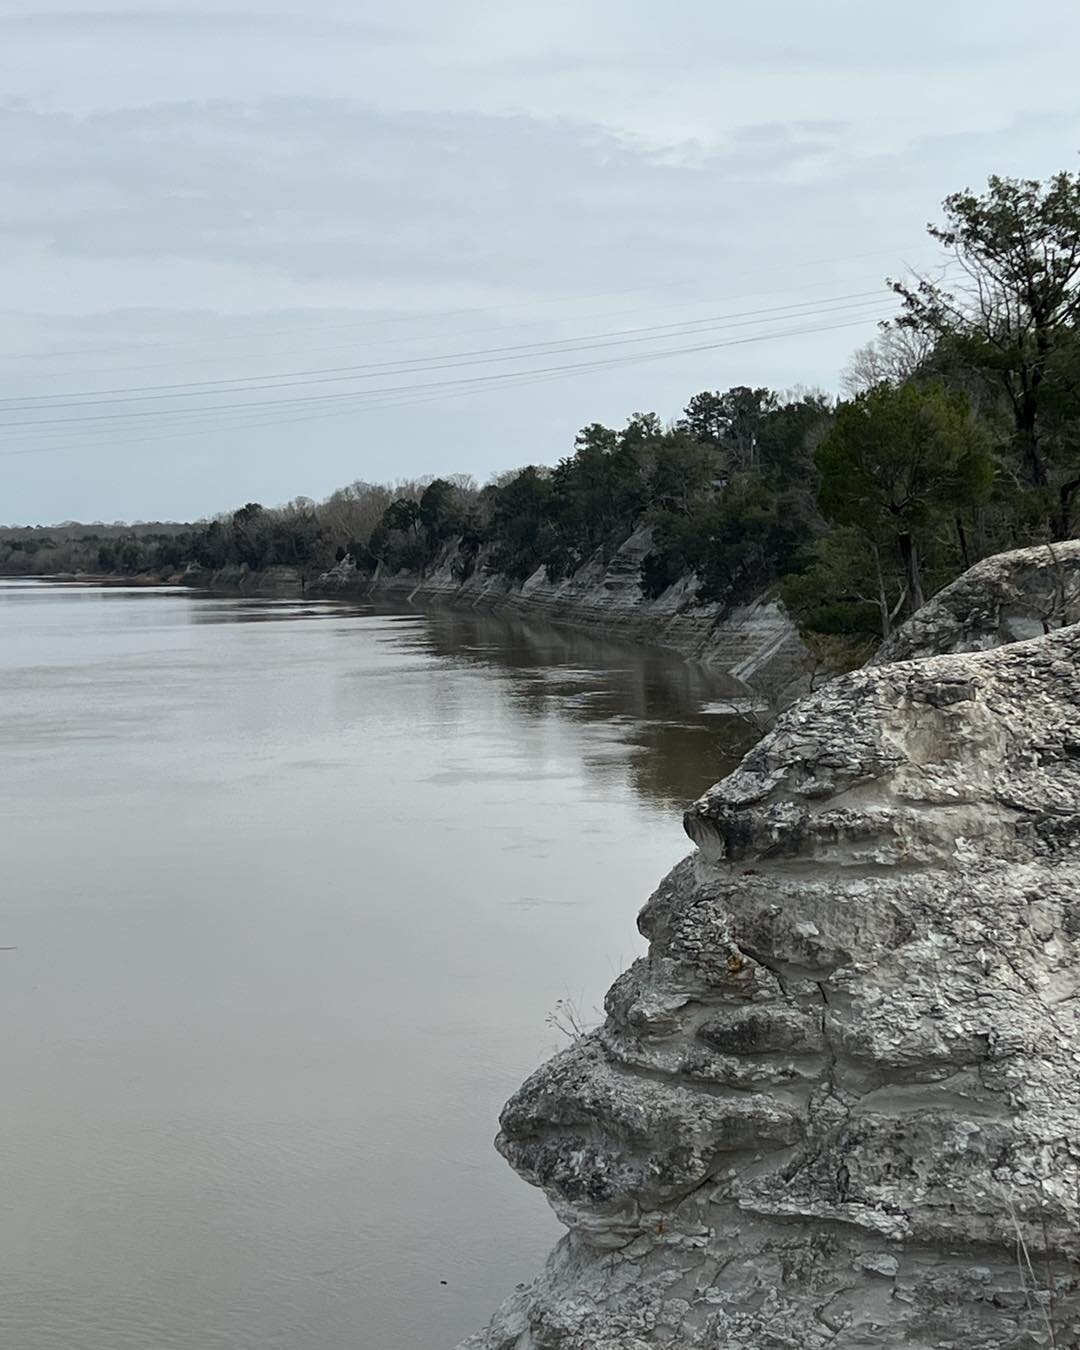 Alabama is home to many unique and beautiful natural scenes.😍 Check out these photos from the white cliffs on the Tombigbee River in rural southwest Alabama. These white cliffs are found in places like Epes, Selma, and Demopolis. This chalk is a typ